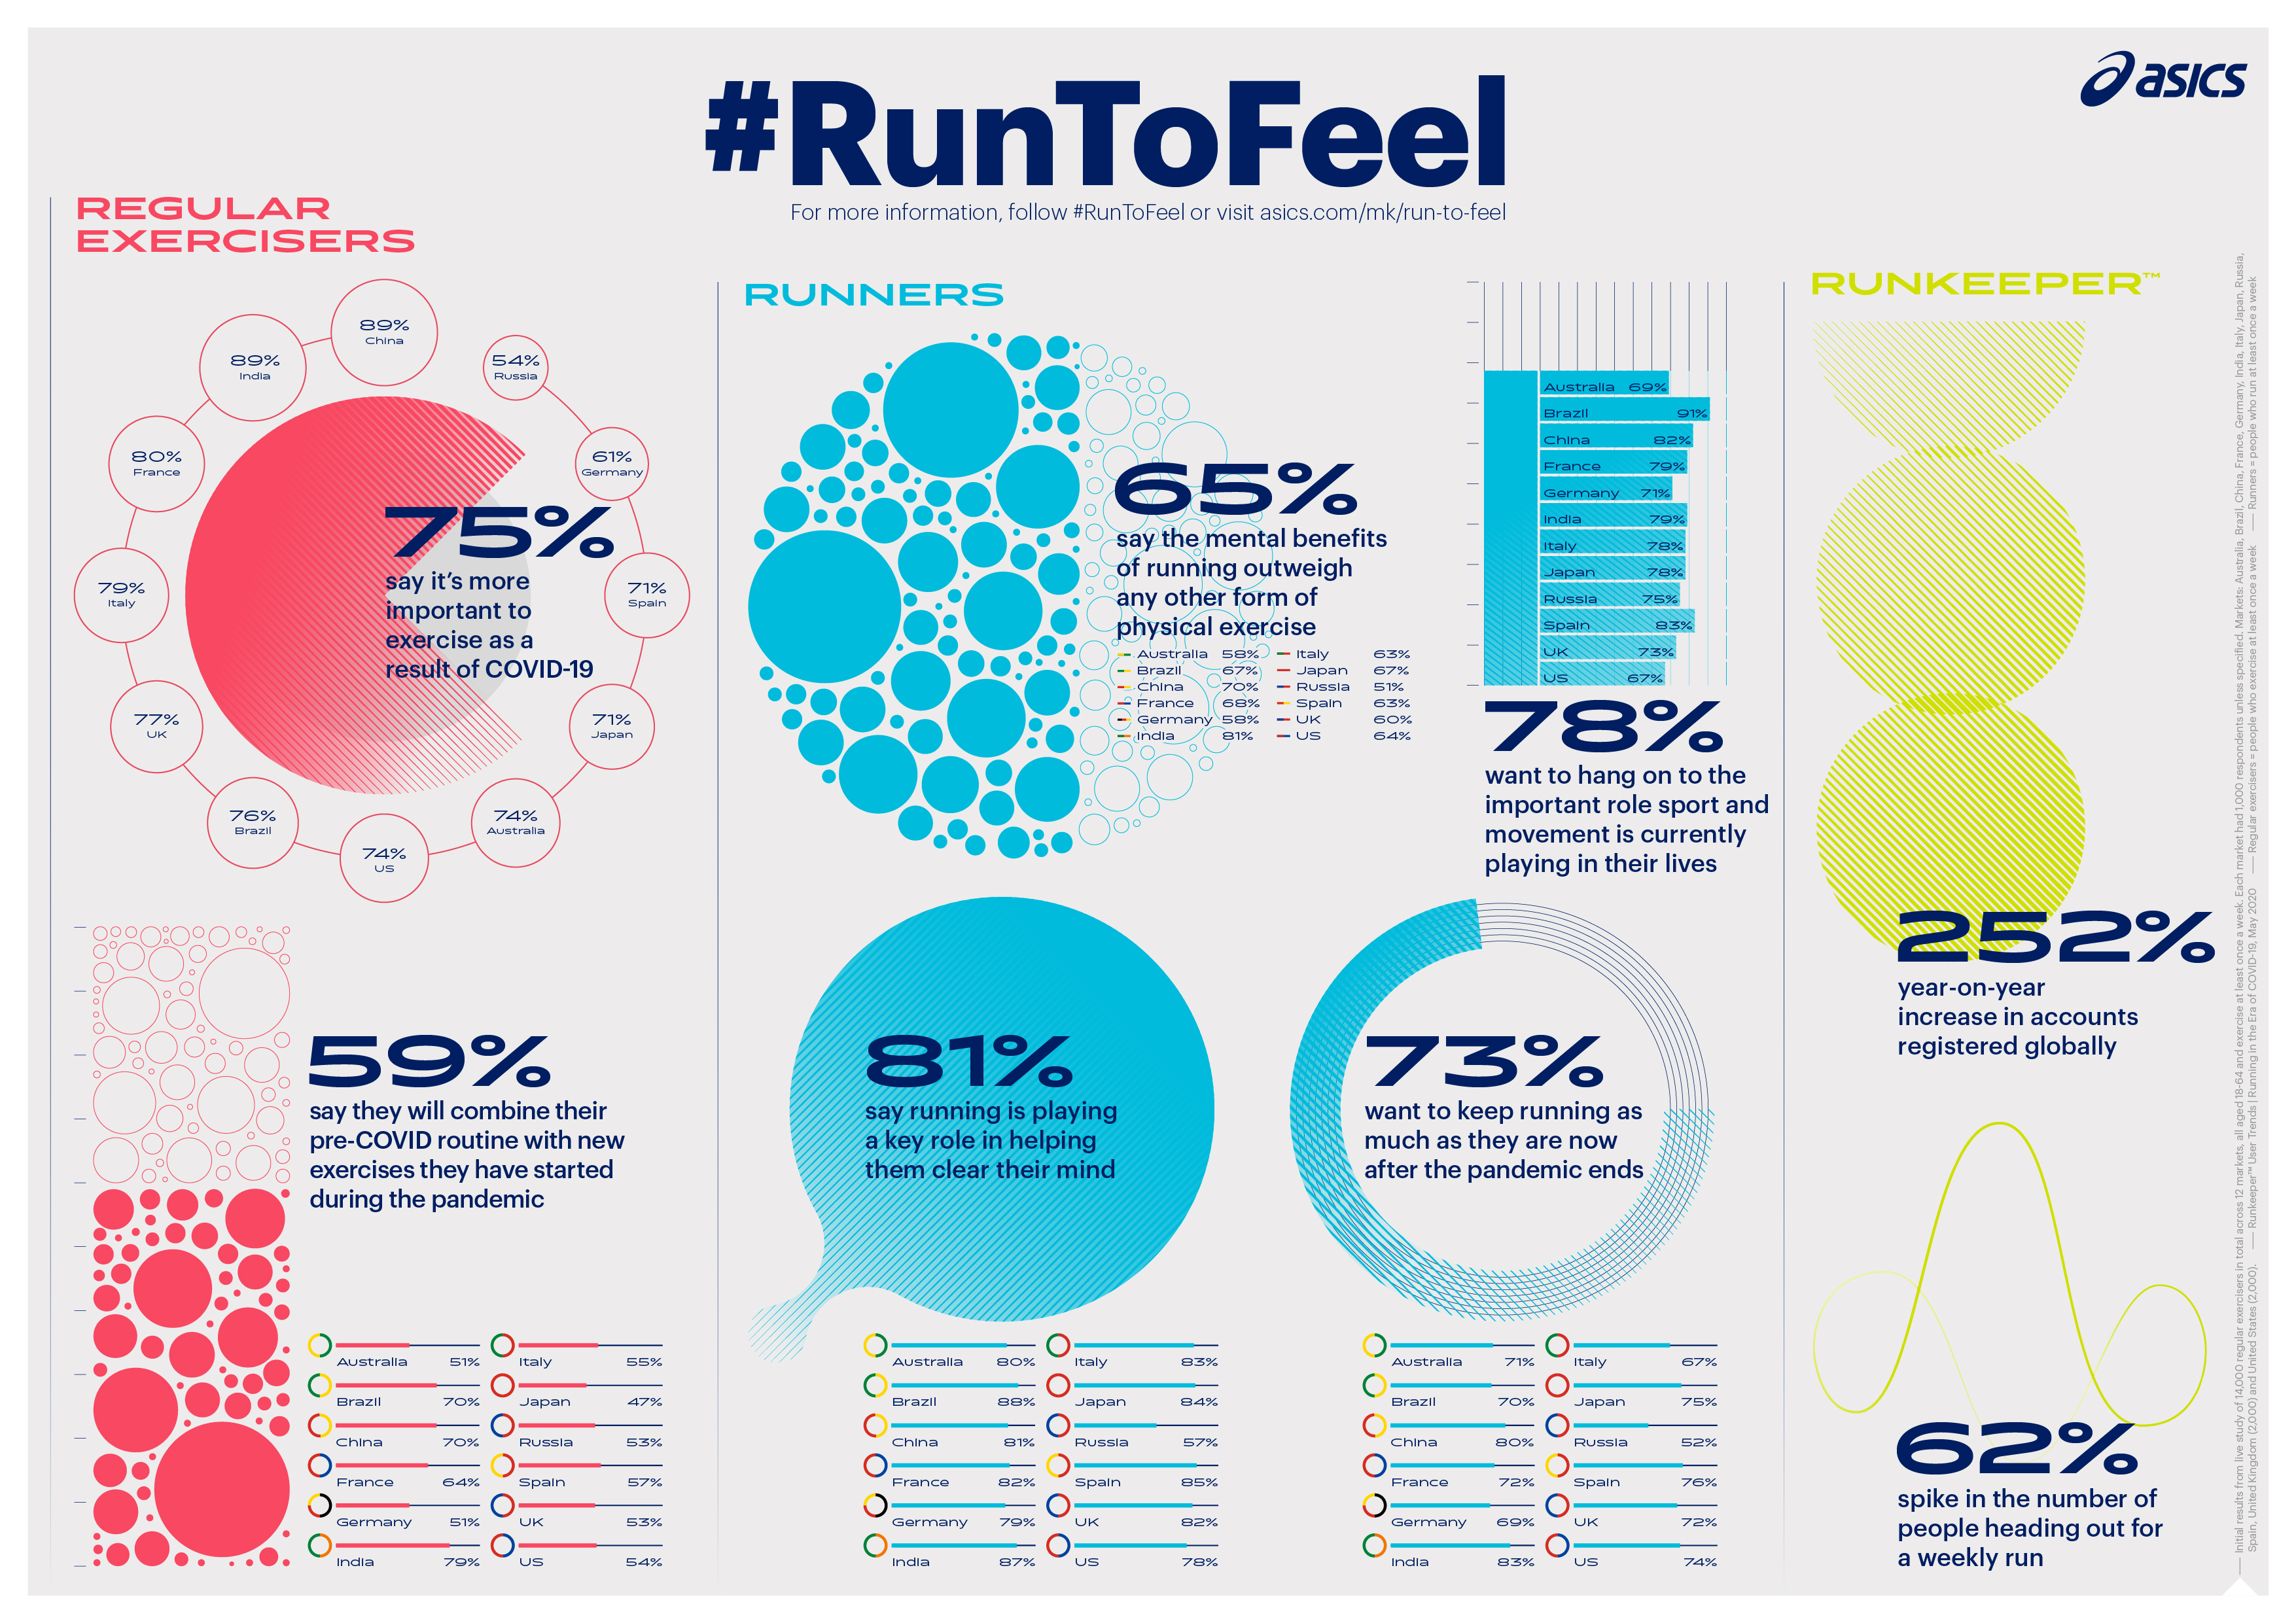 An image with graphics about running habits around the worldA